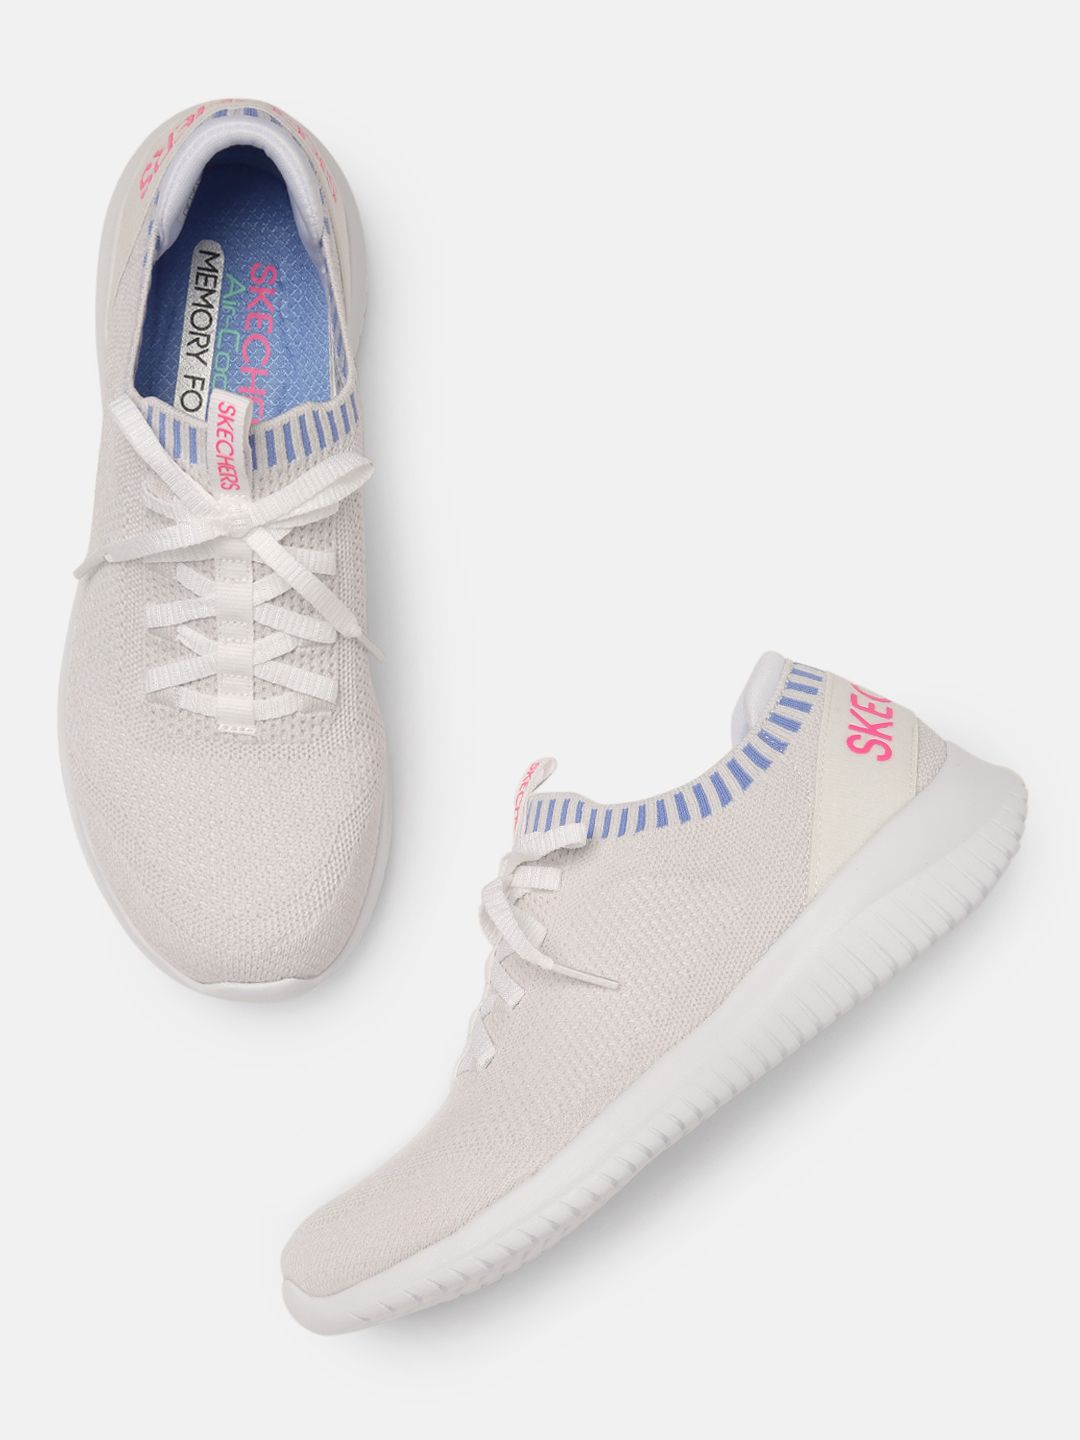 Skechers Women Off-White ULTRA FLEX - RAPID ATTENTION Woven Design Sneakers Price in India